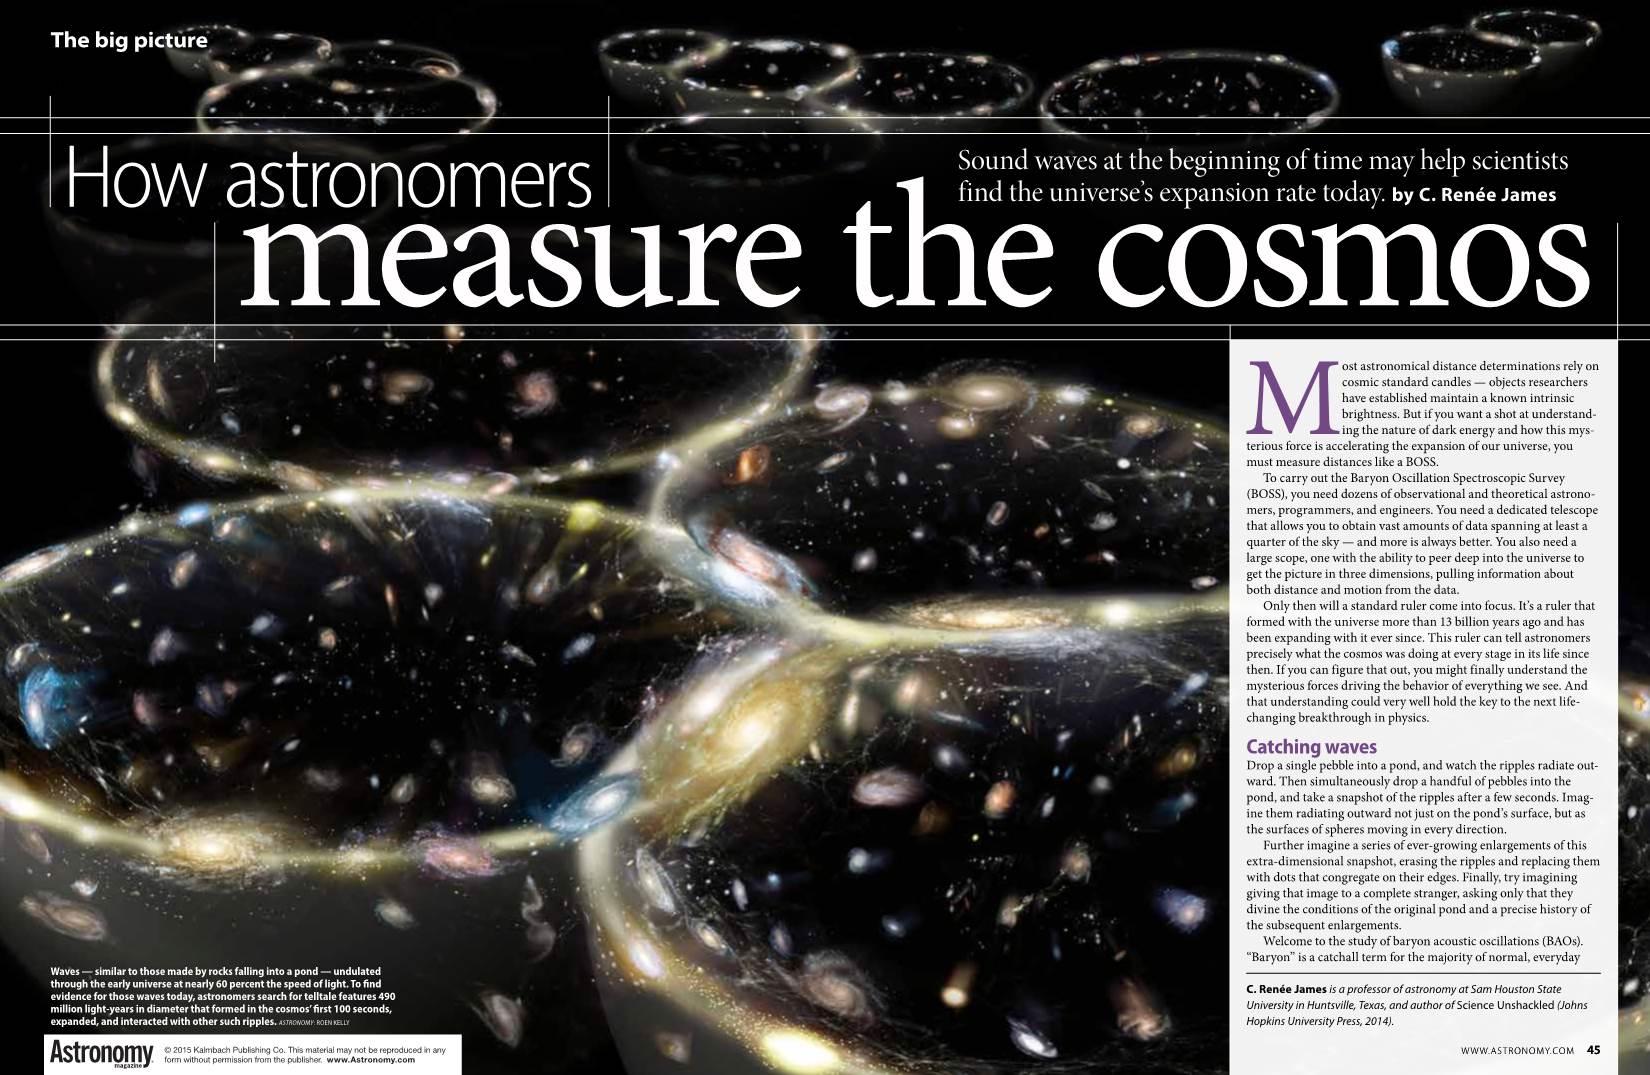 How Astronomers Measure the Cosmos